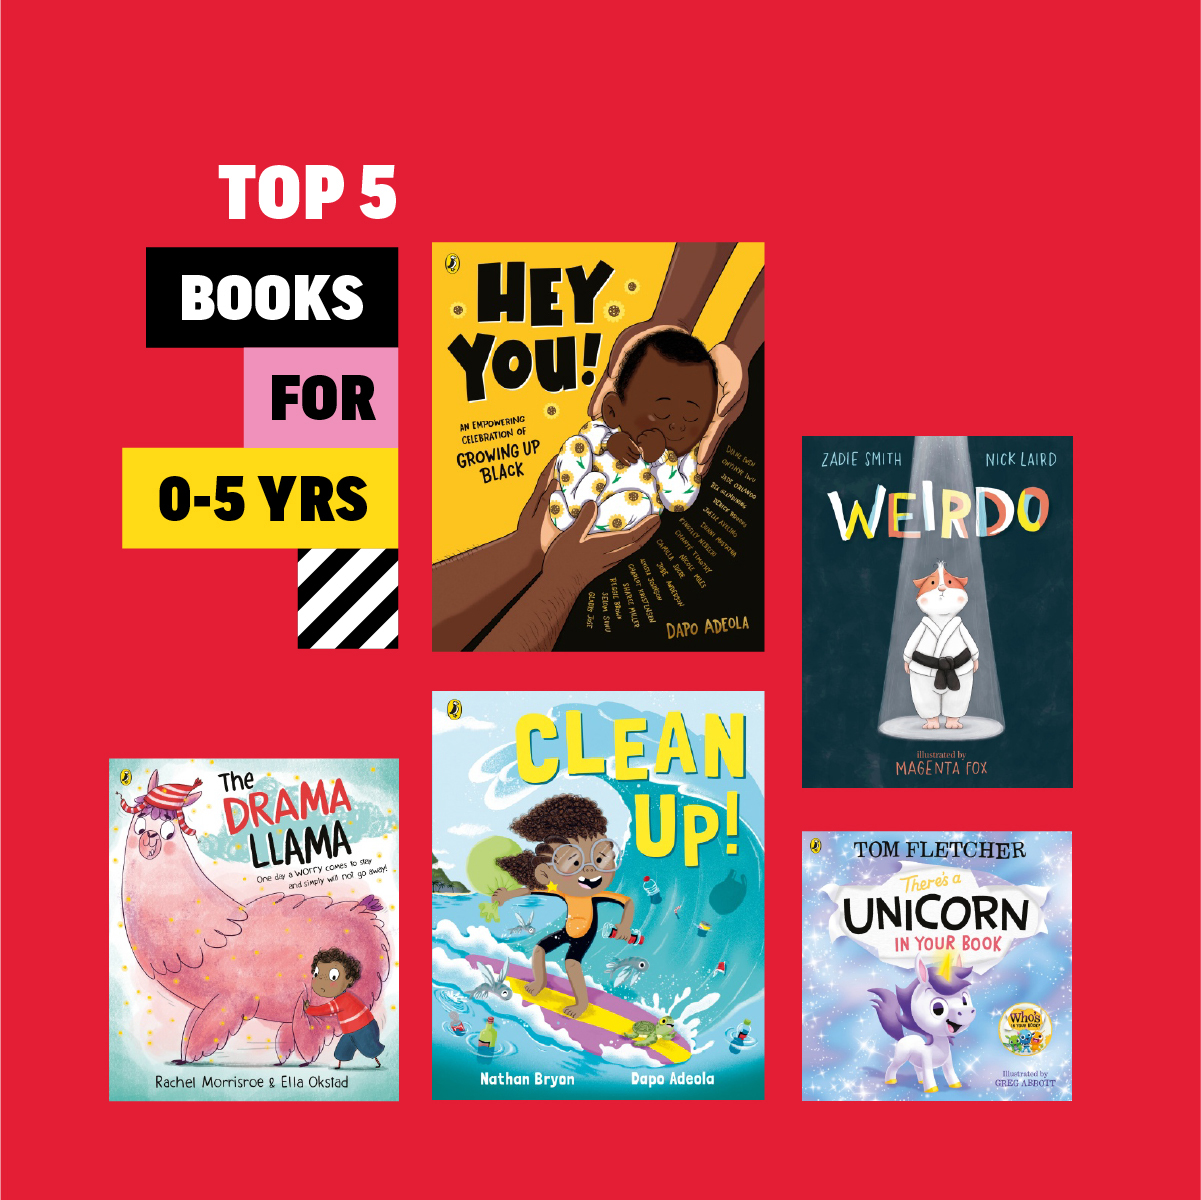 An image of five of the top books for under 5s on top of a bright red background